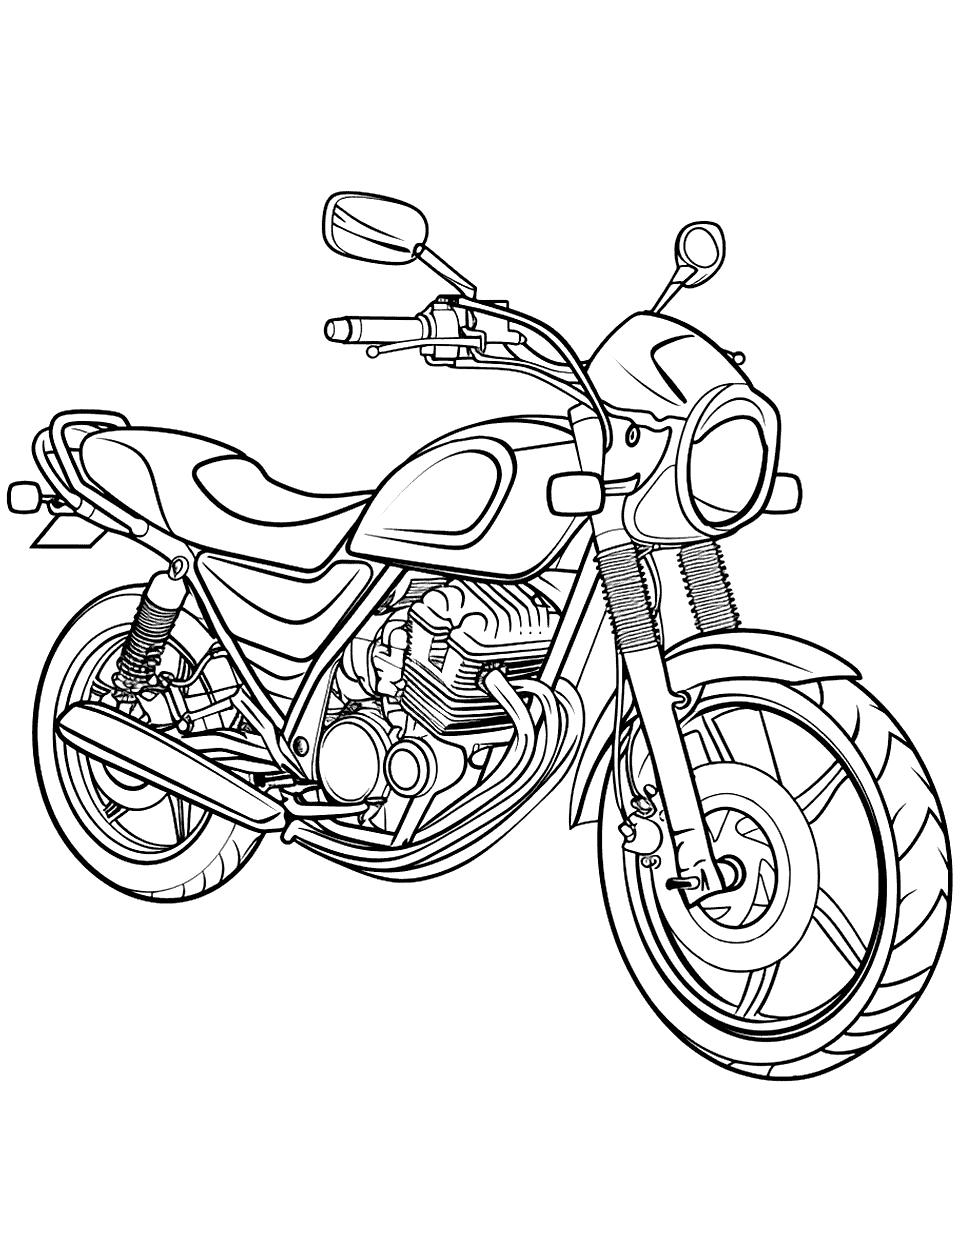 Simple Motorcycle Outline Coloring Page - A basic outline of a motorcycle.